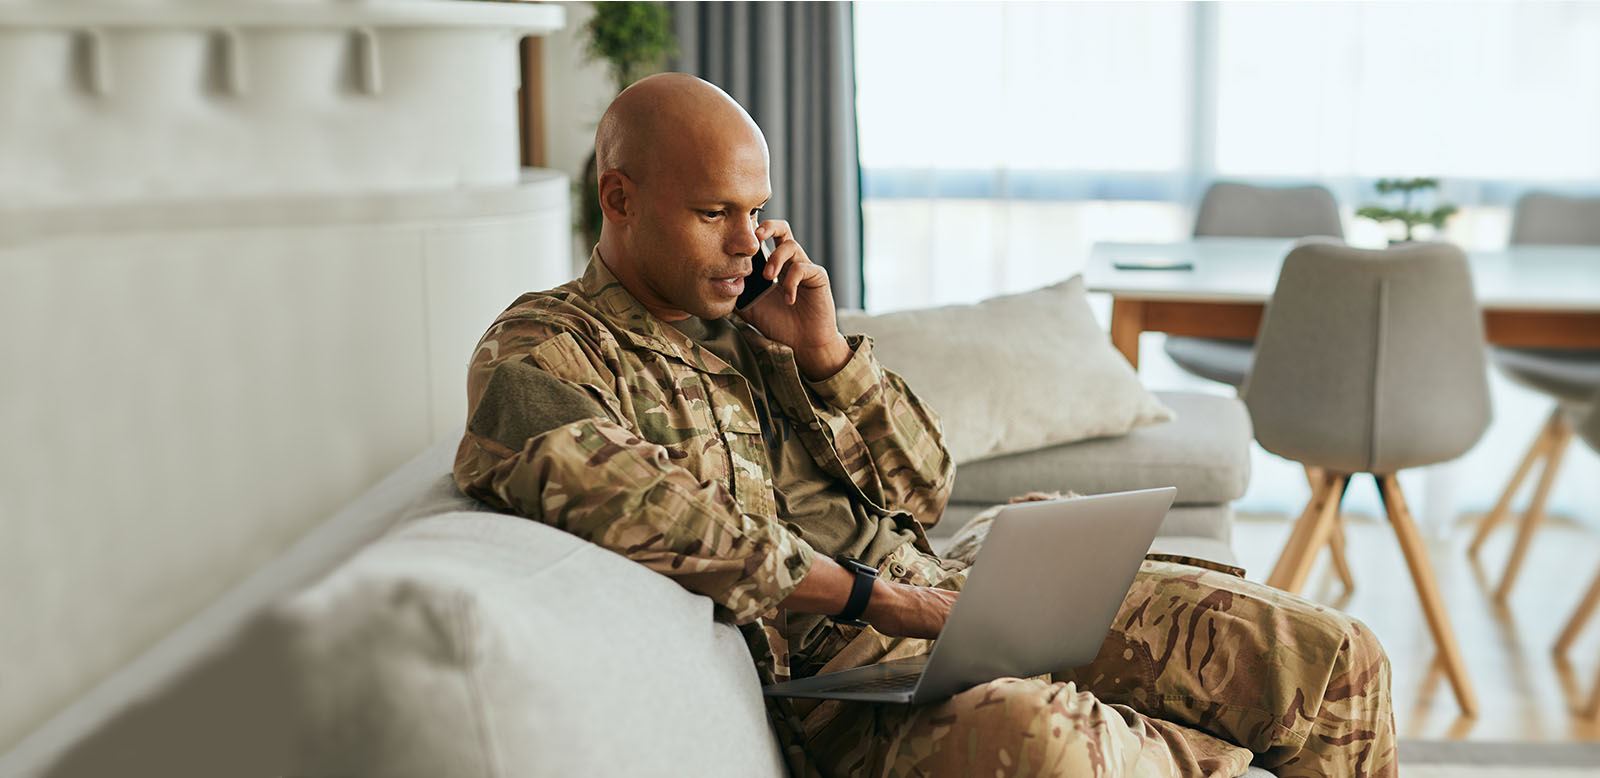 Male soldier in camouflage uniform sitting on the couch talking on a cell phone and looking at a laptop.